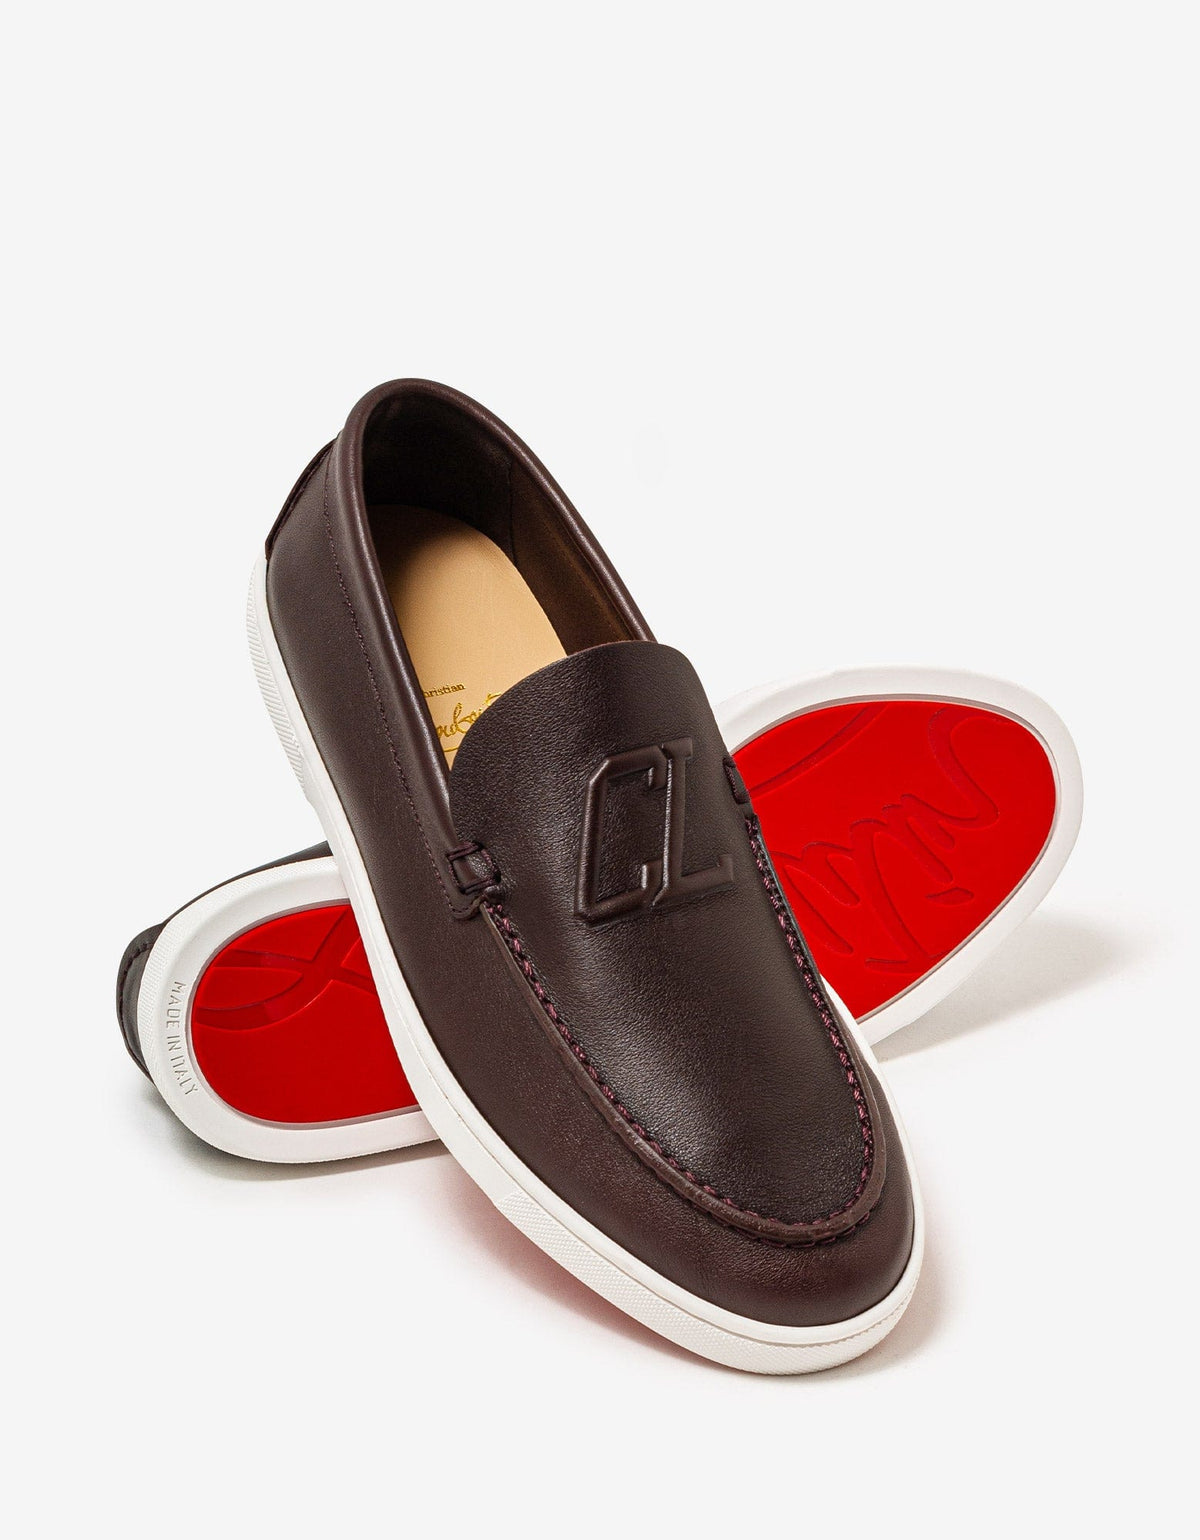 Christian Louboutin Varsiboat Brown Leather Boat Shoes -